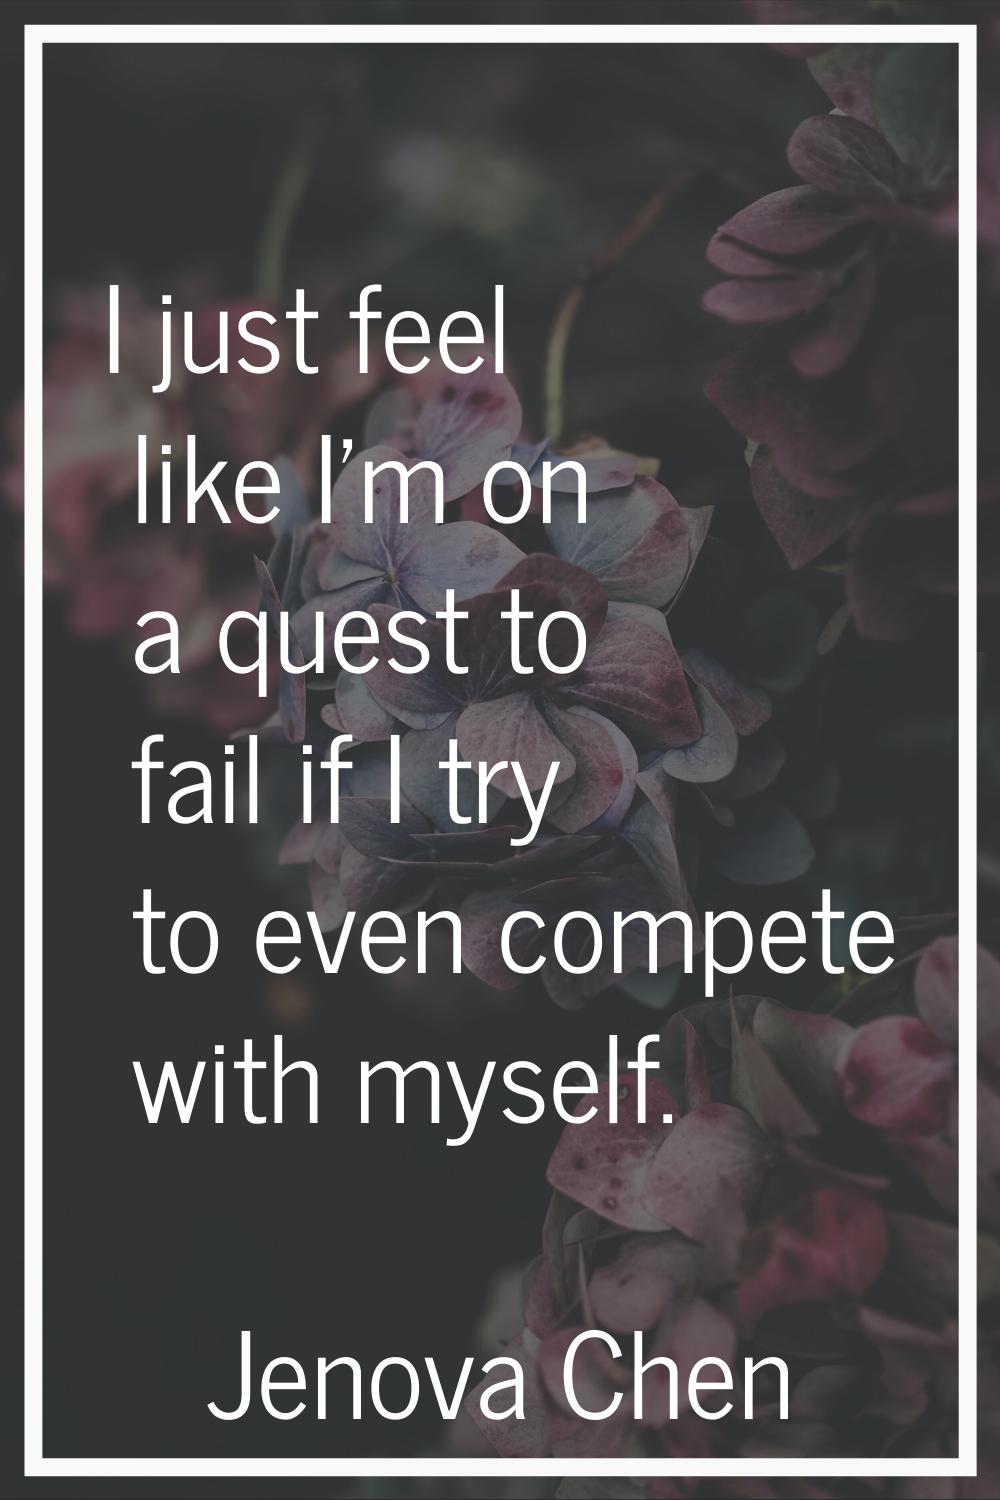 I just feel like I'm on a quest to fail if I try to even compete with myself.